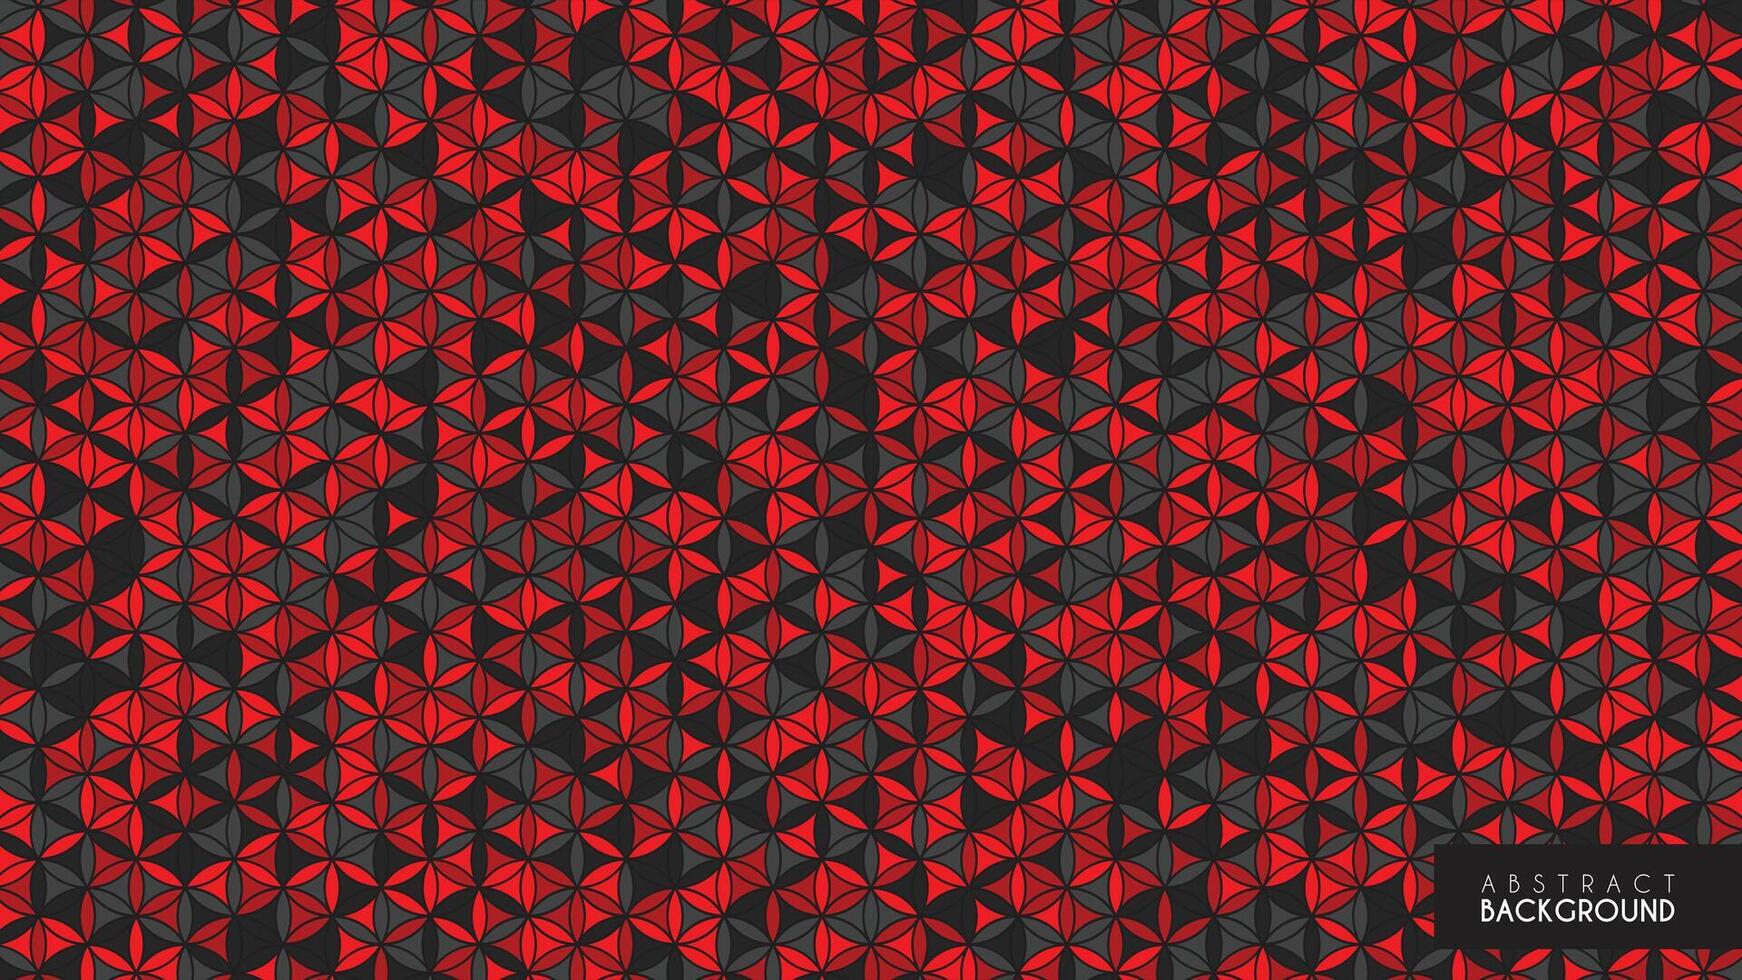 Creative modern abstract pattern background. vector